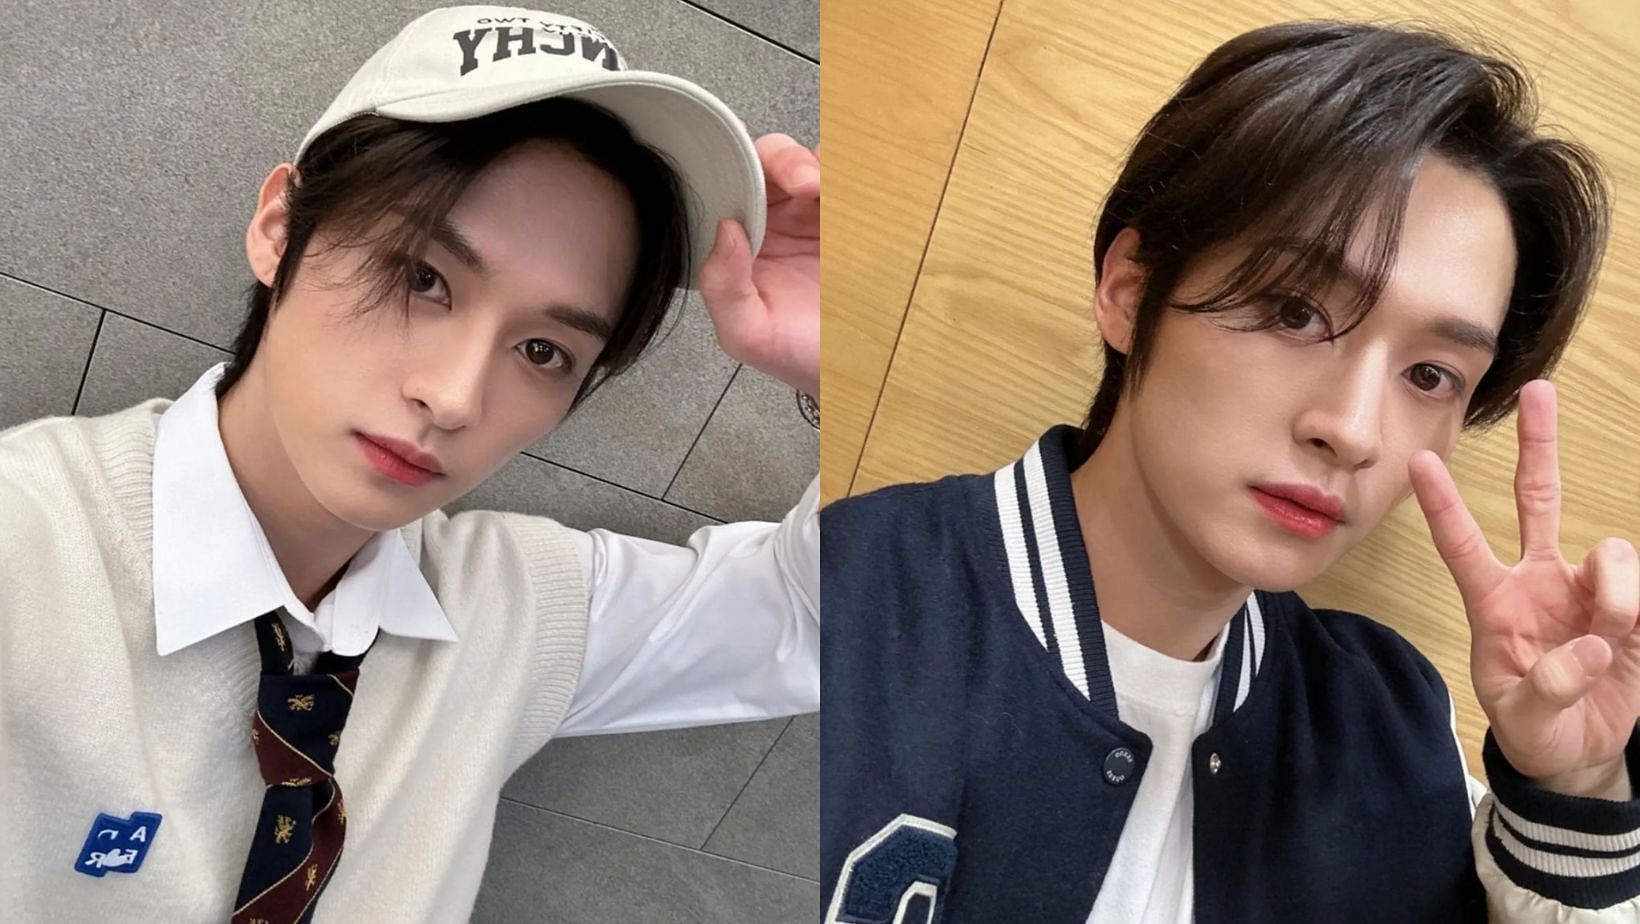 &ldquo;Will always be proud of you&rdquo;: Stray Kids&rsquo; Lee Know becomes the youngest member to get appointed to the Bob Pierce Honor Club for World Vision Korea. (Images via Instagram/@realstraykids)